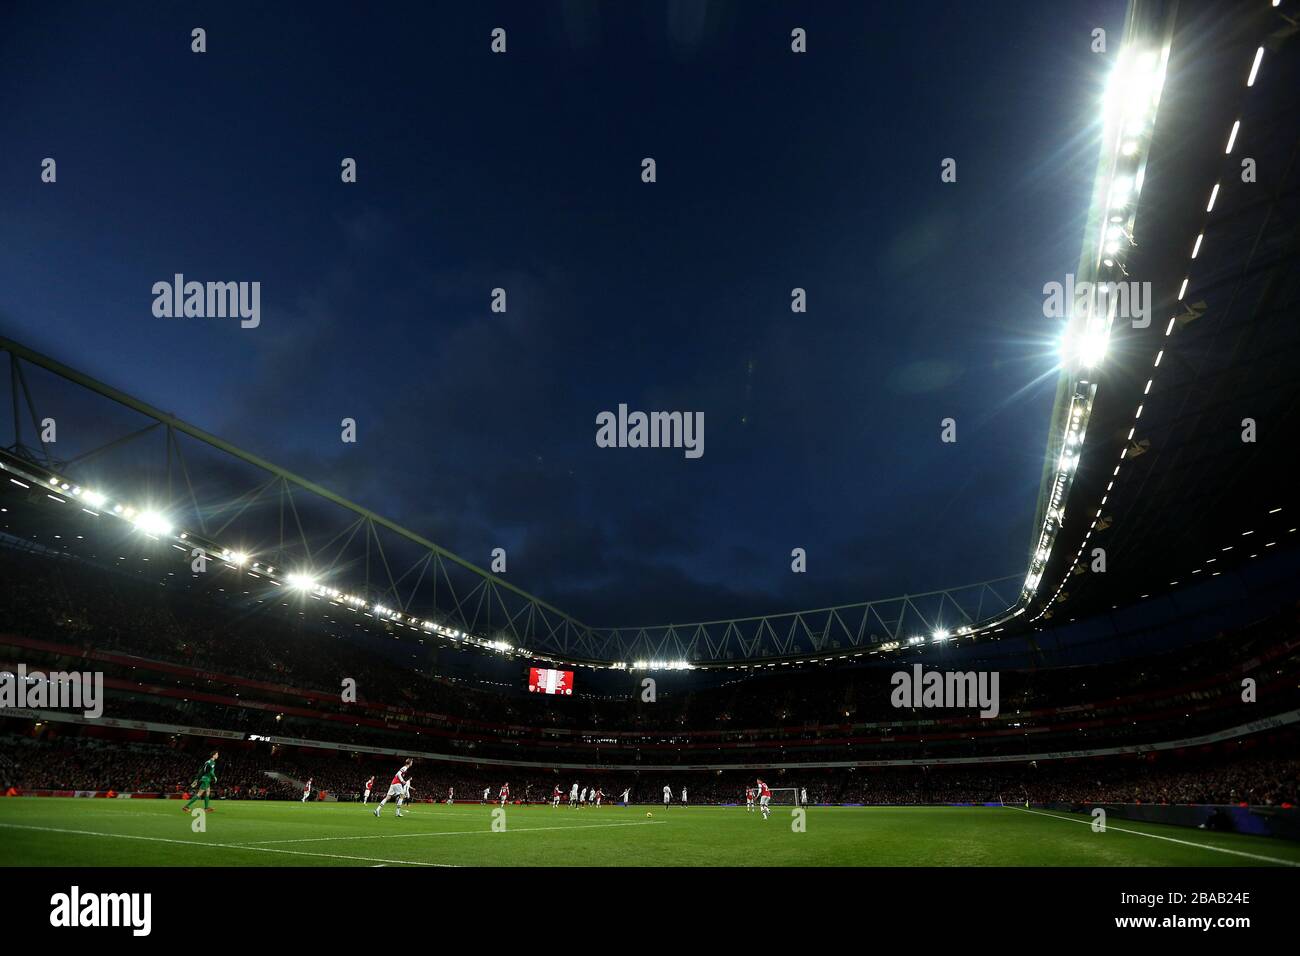 A general view of the action underway at the Emirates Stadium Stock Photo